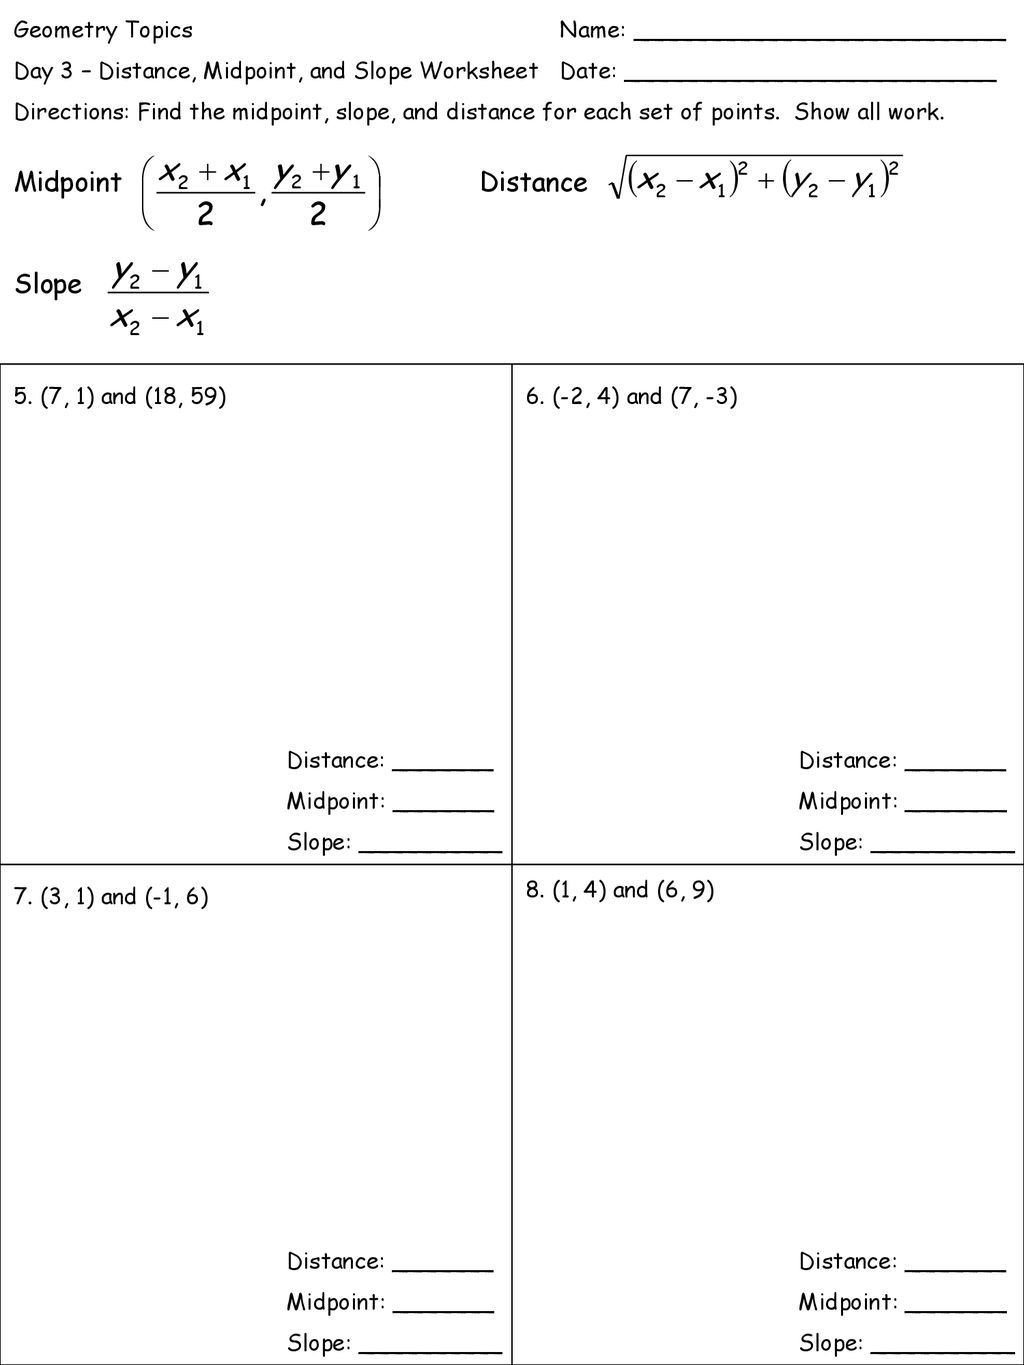 Geometry Topics Name: - ppt download Inside Midpoint And Distance Worksheet